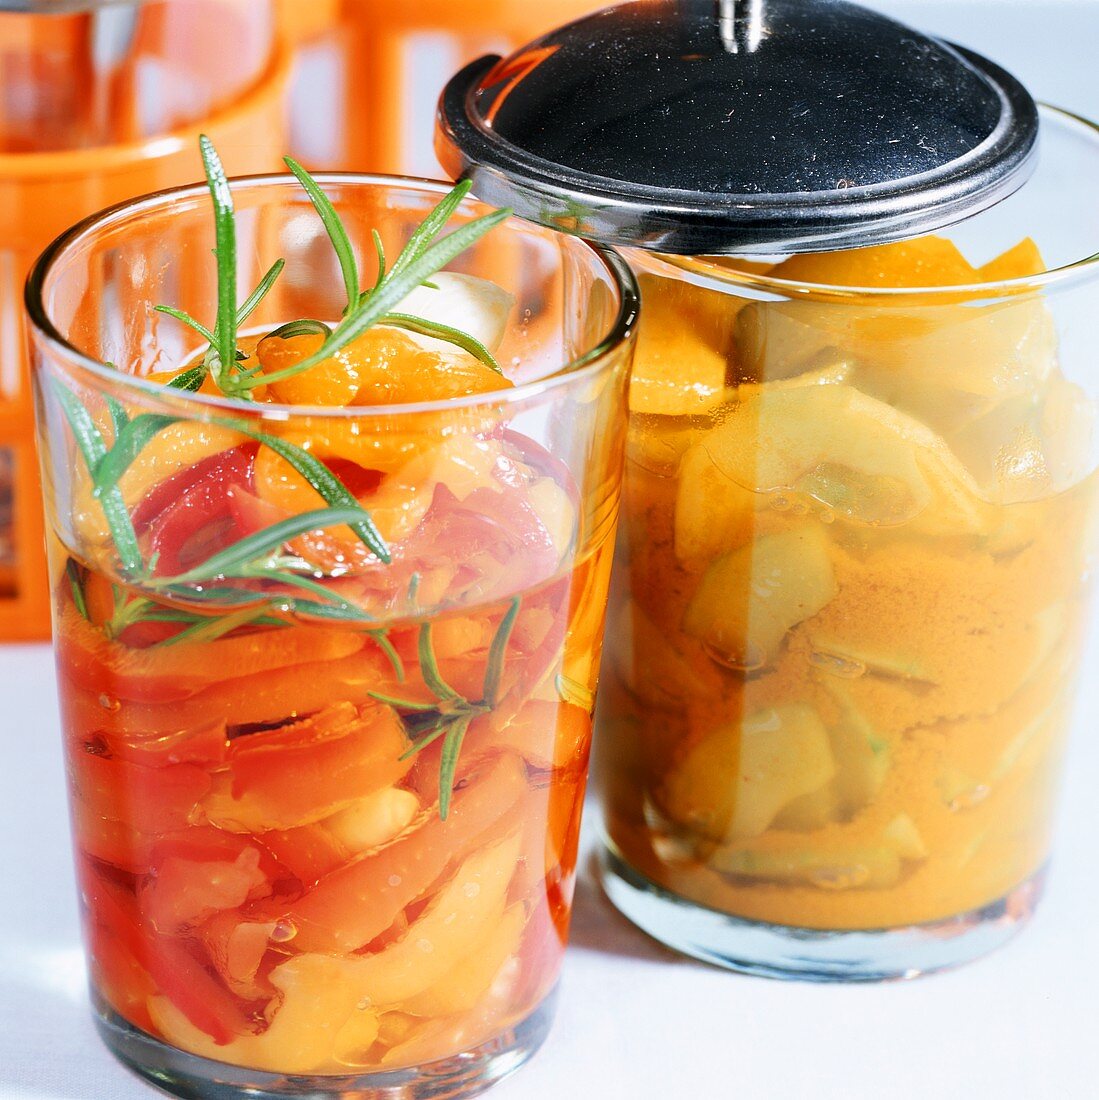 Pickled peppers and gherkins with turmeric in jars